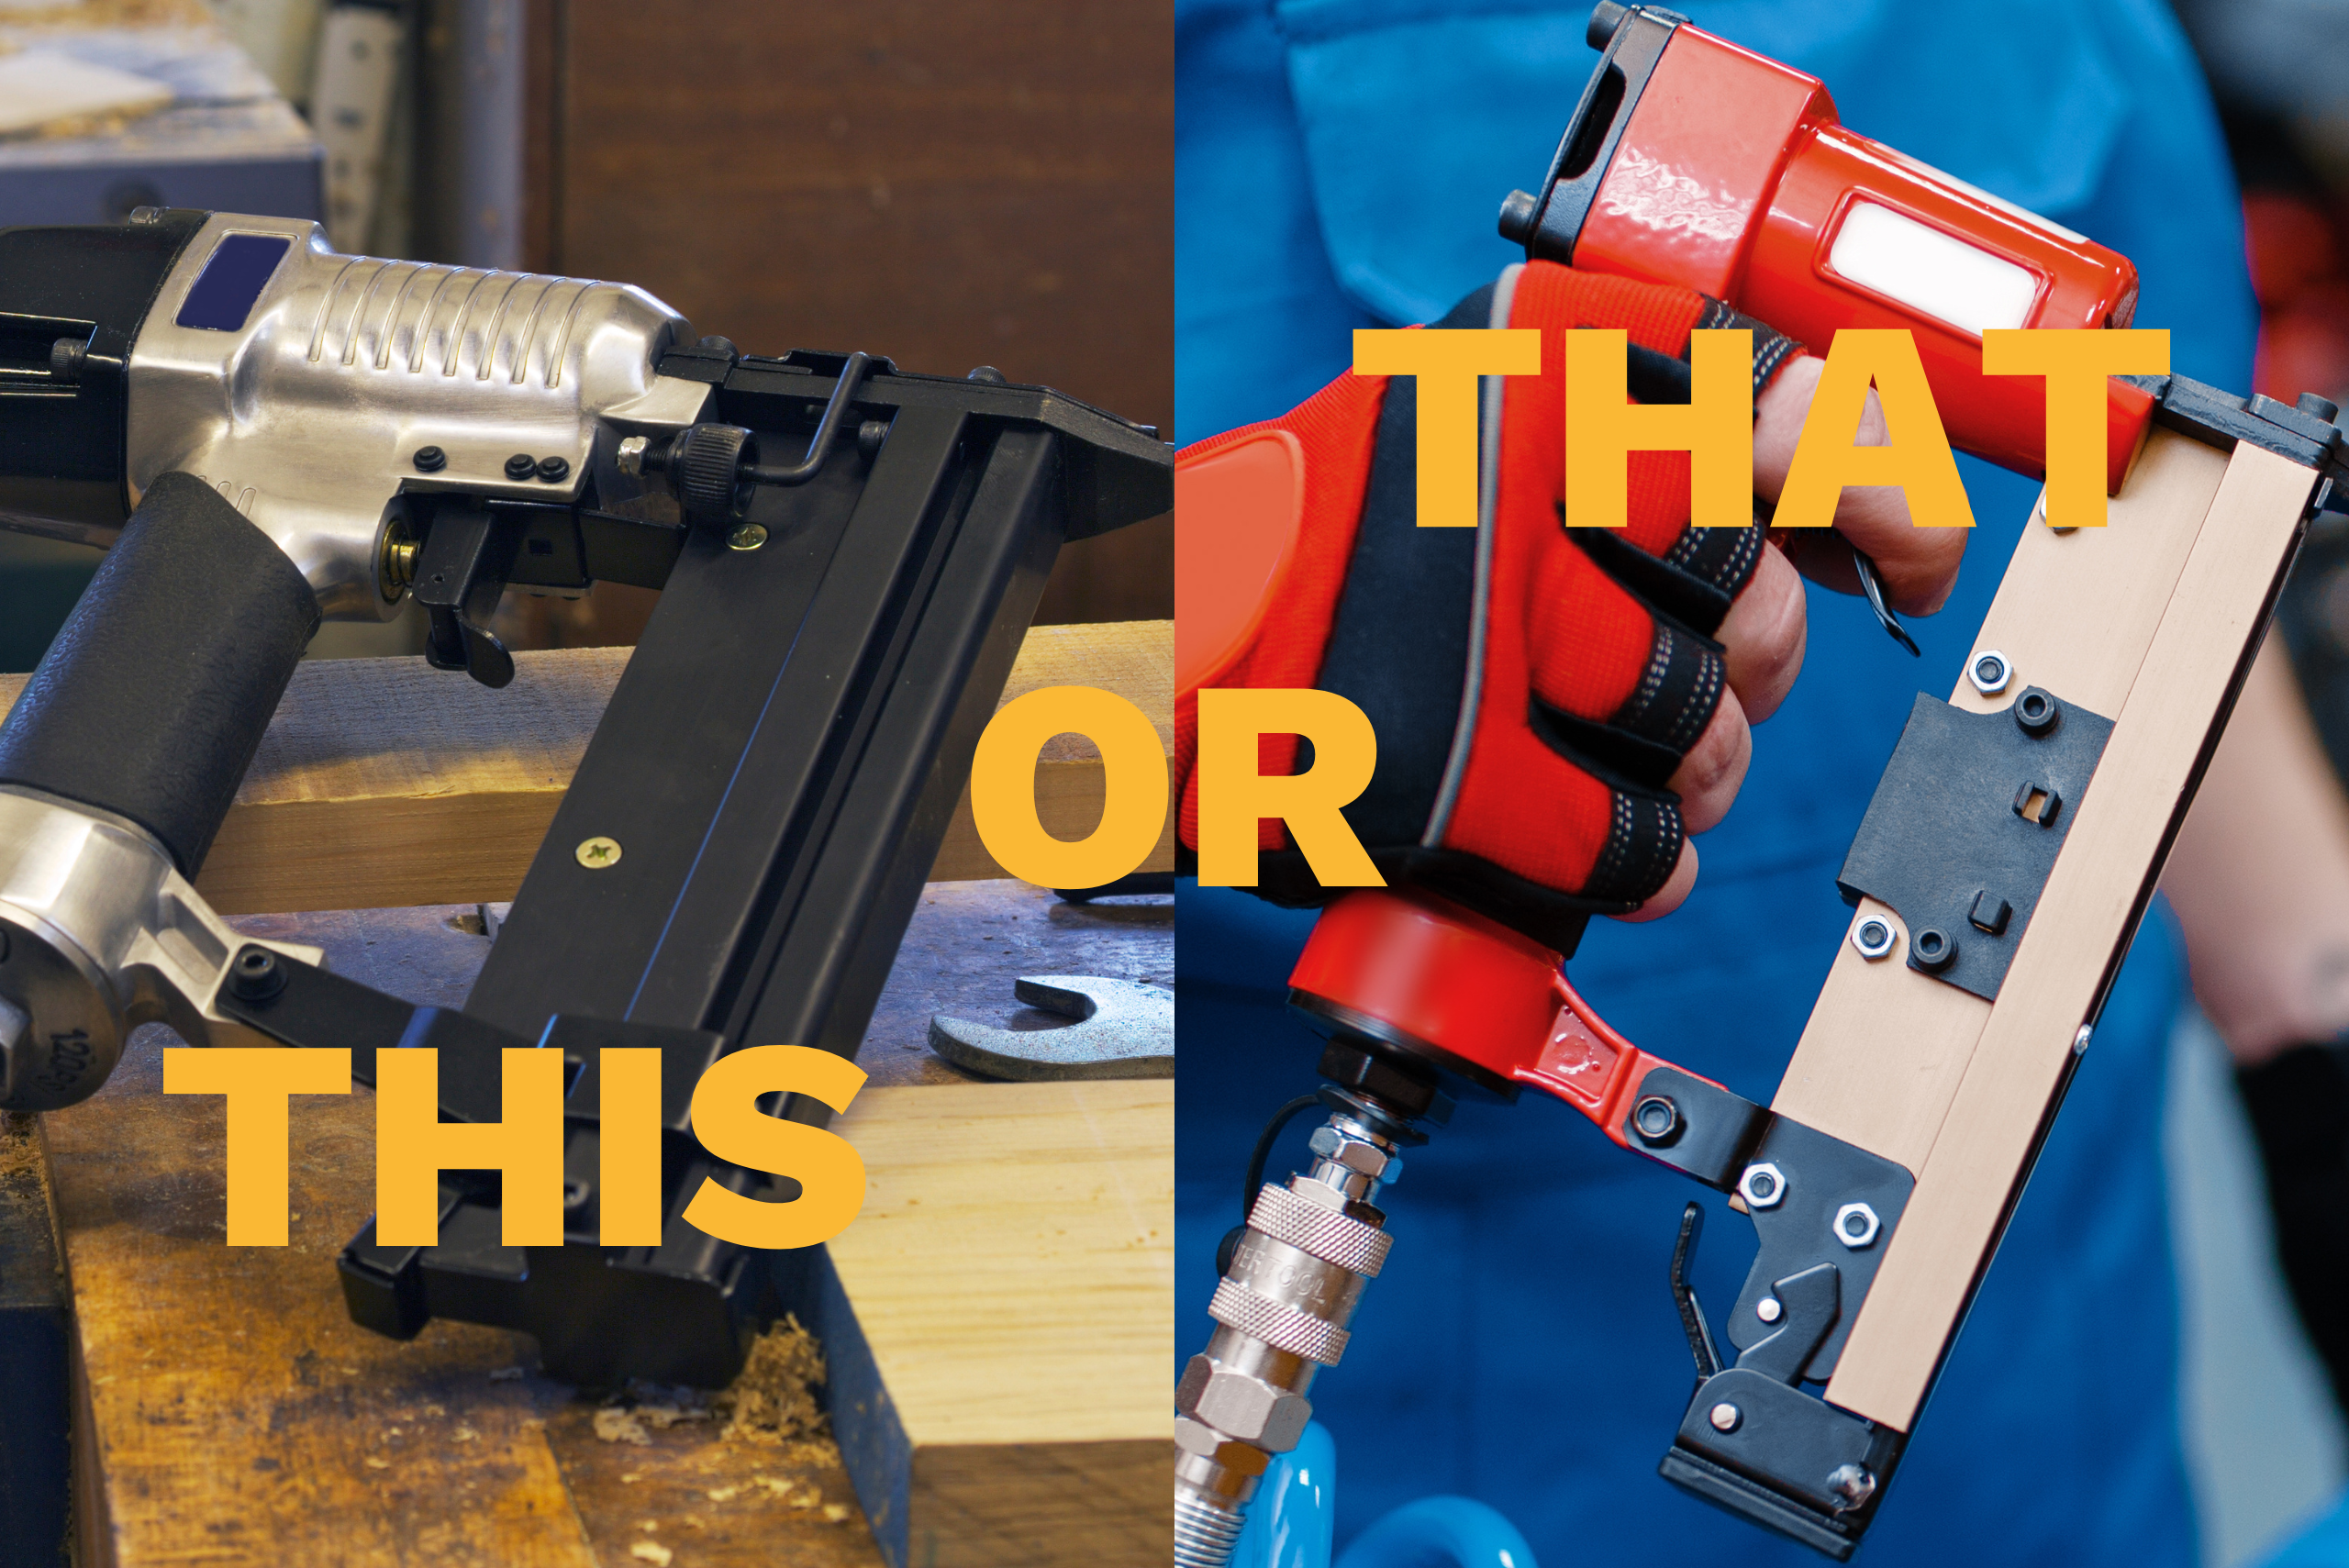 A brad nailer on the left and pin nailer on the right, overlaid text that reads "This or That"